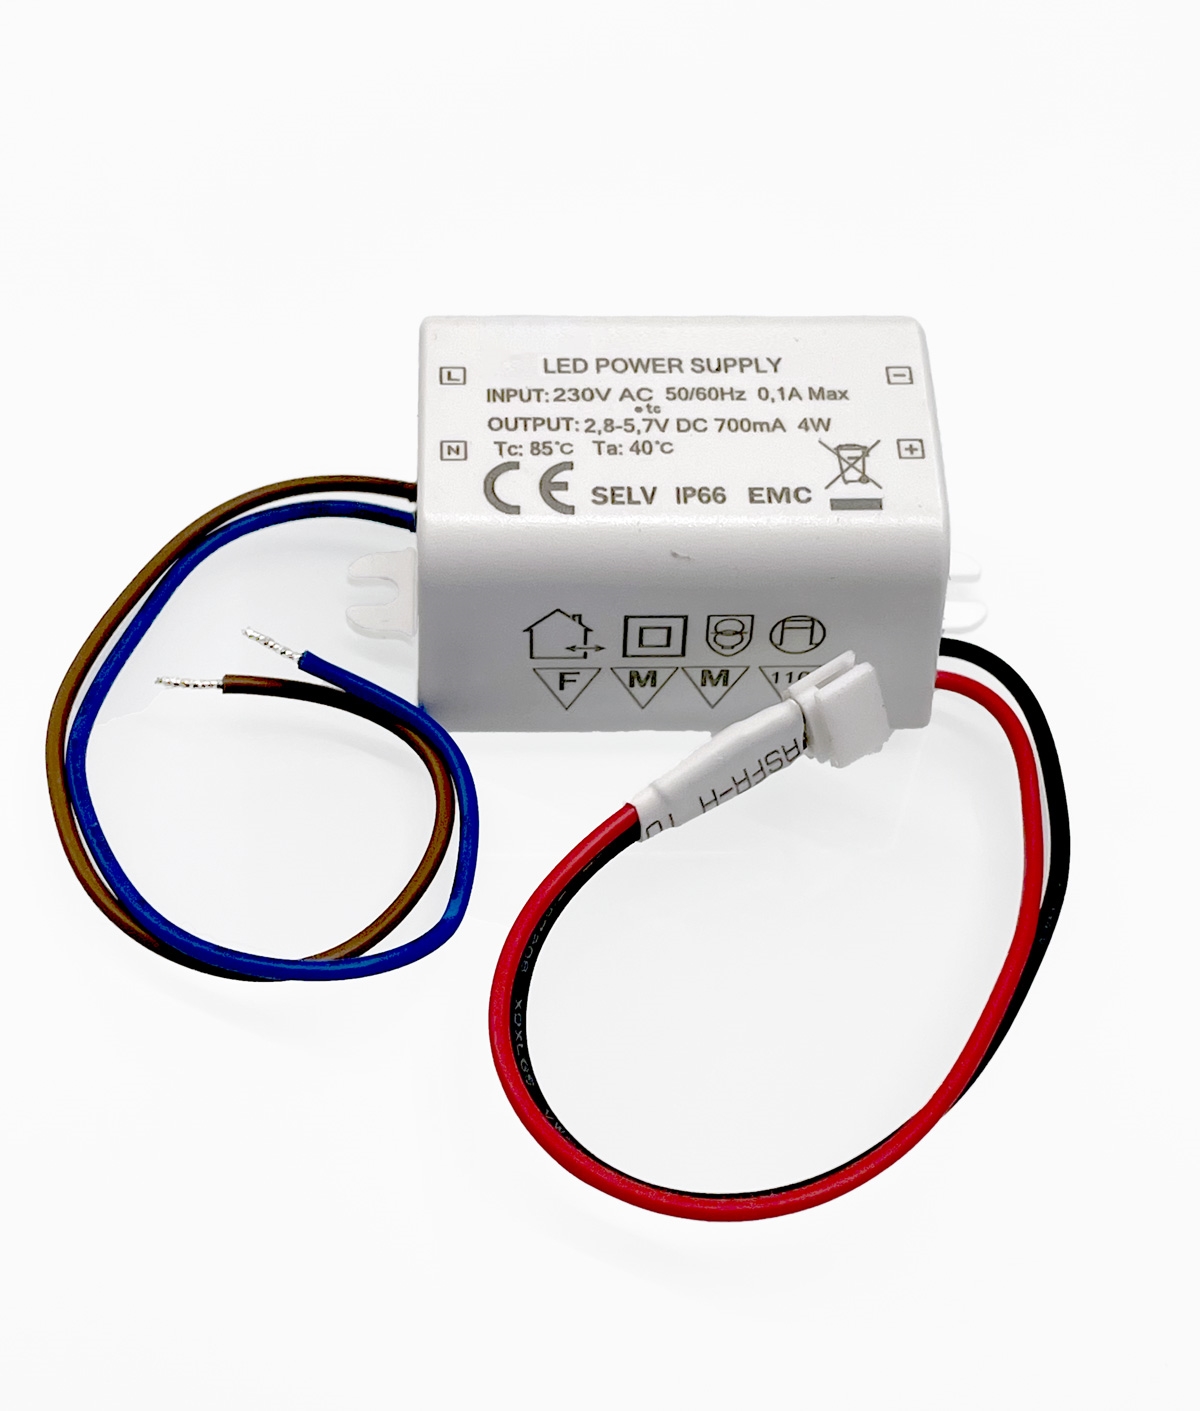 1-3w 700mA Ultra Compact LED Driver - Small enough to fit in